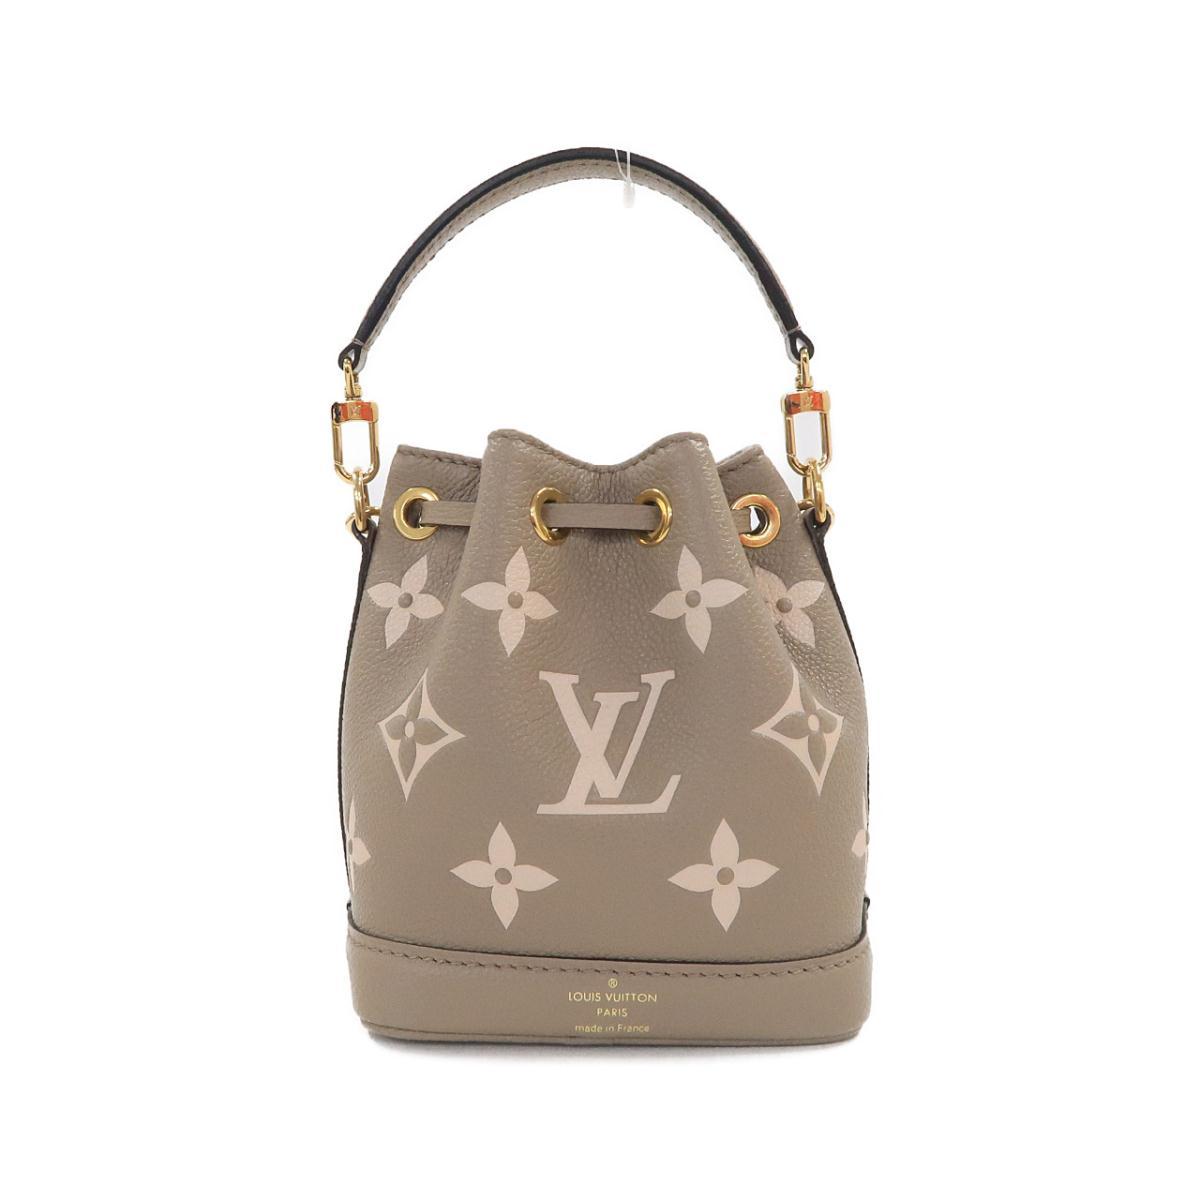 How To Spot A Fake Louis Vuitton: 10 Questions to Ask - undefined